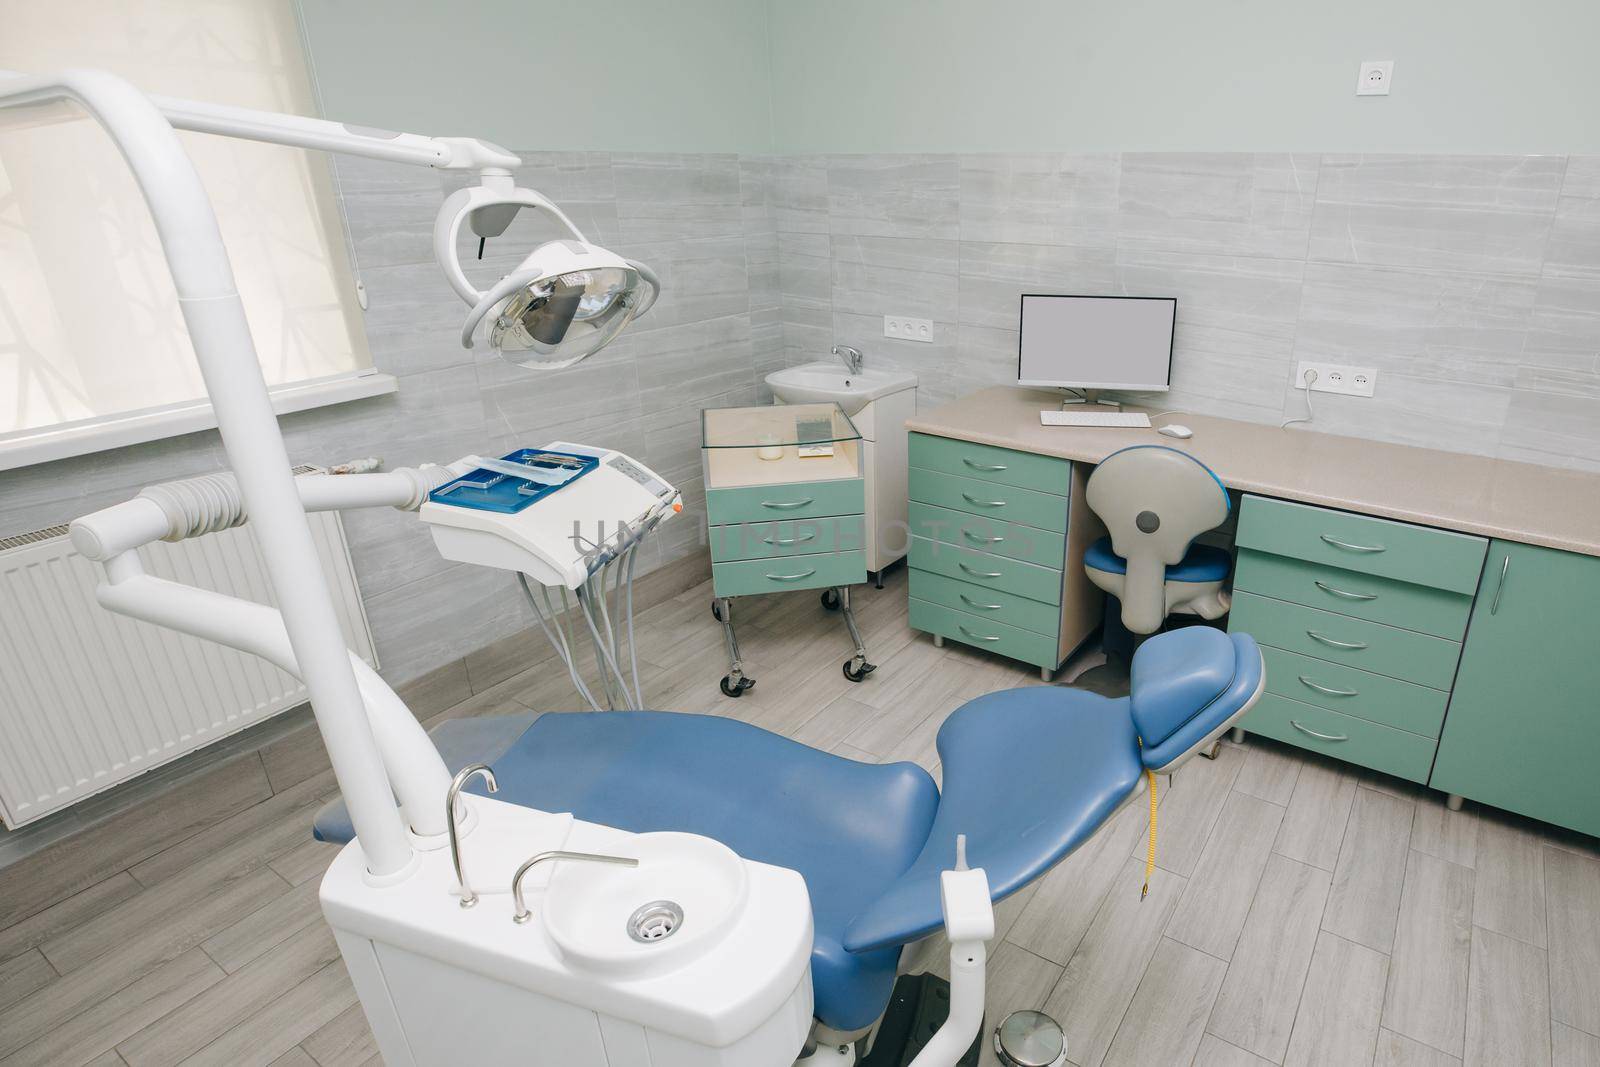 Dentist Office, Dental Hygiene, Dentist's Chair. Modern dental practice. Dental chair and other accessories used by dentists in blue, medic light. by uflypro